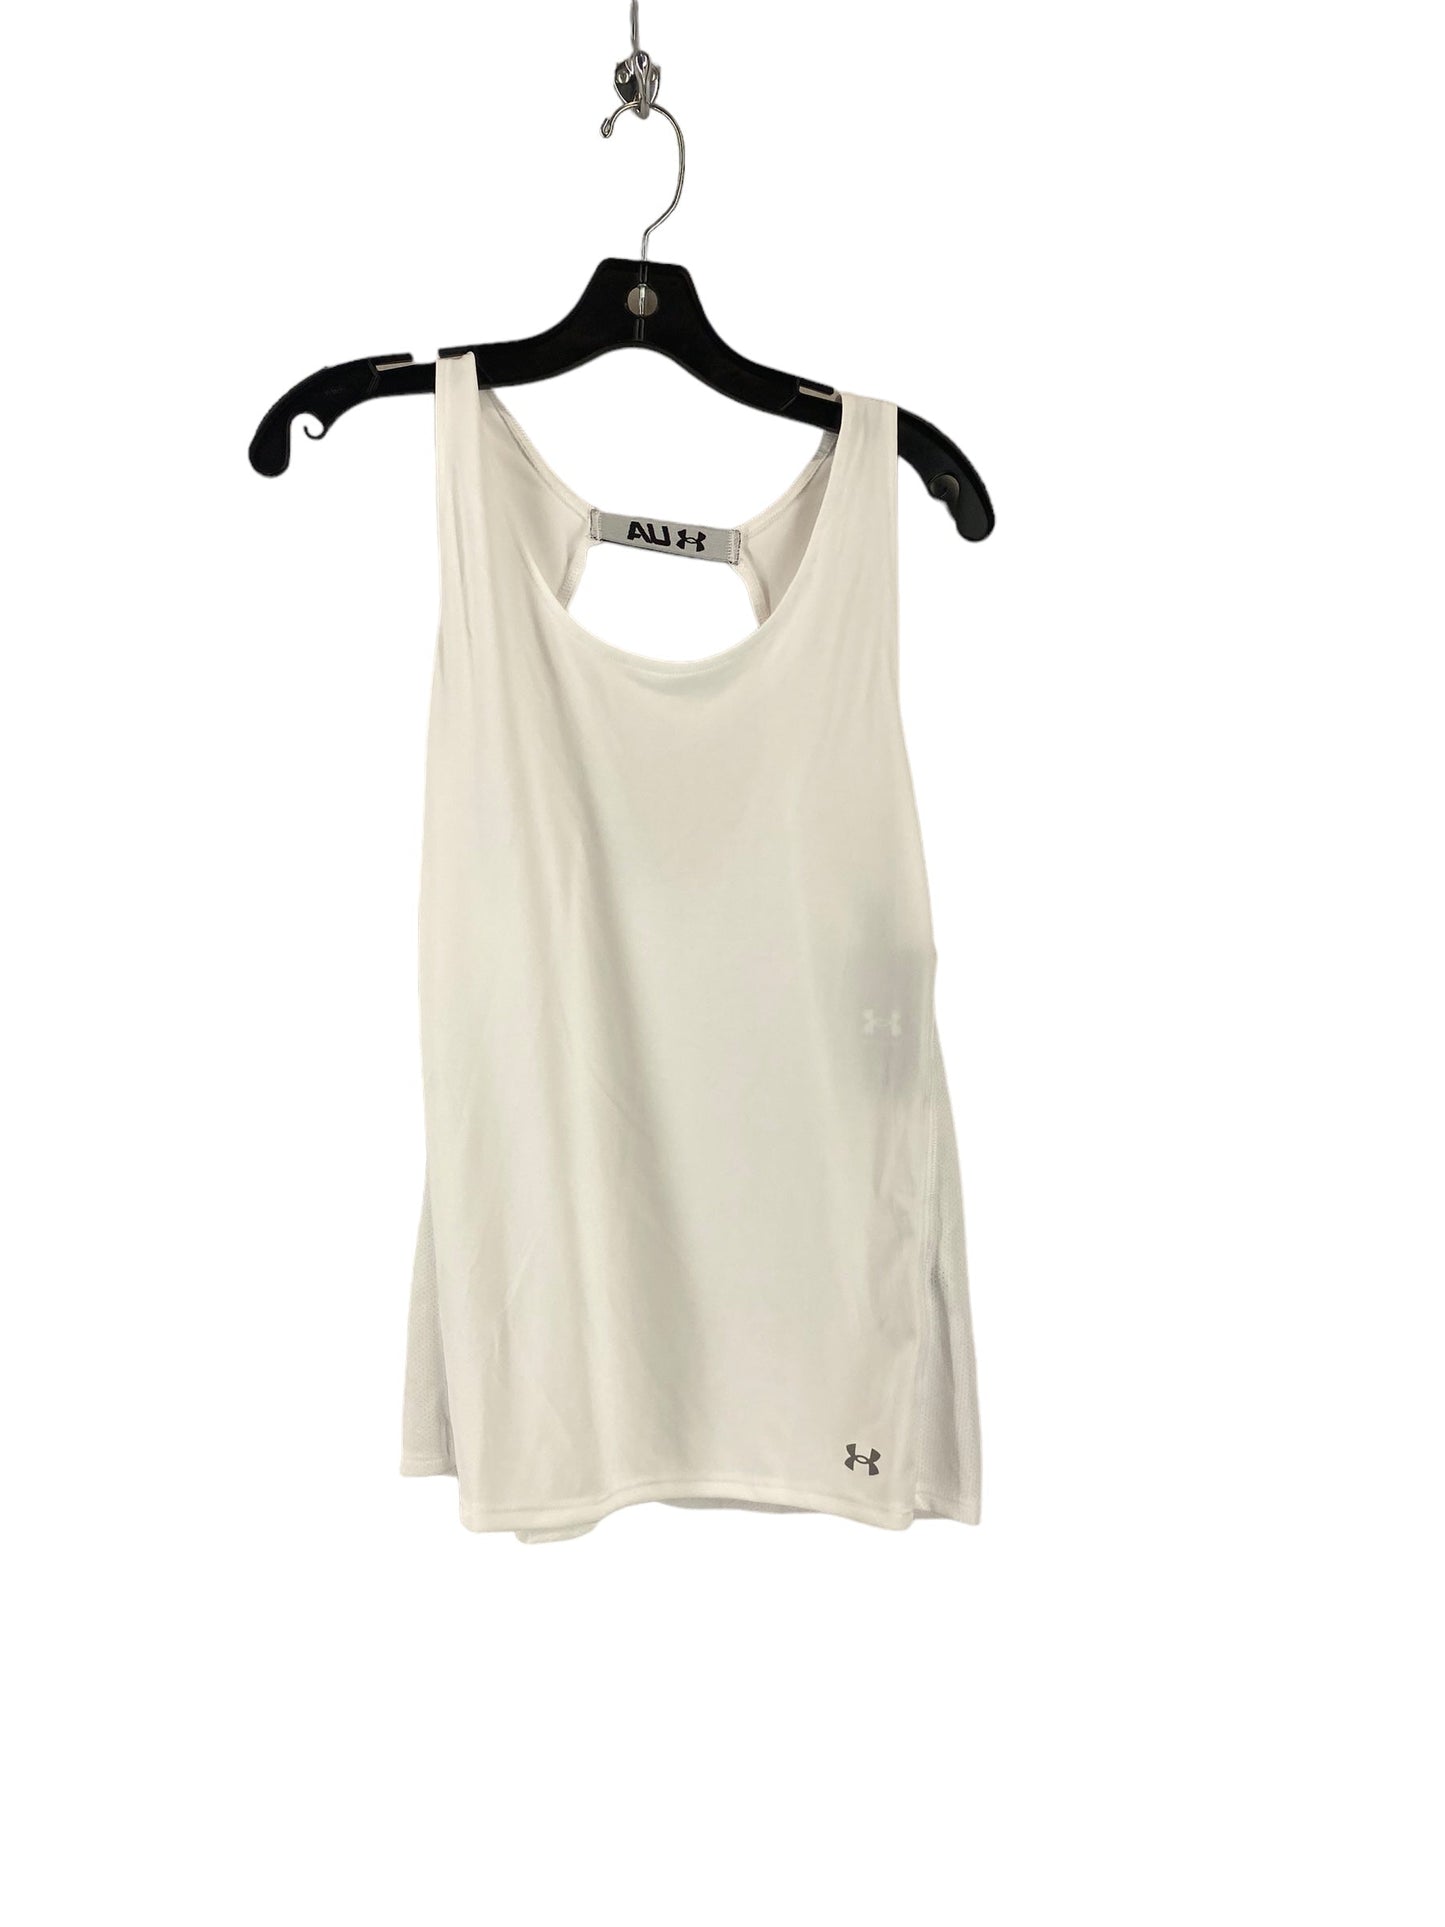 White Athletic Tank Top Under Armour, Size L